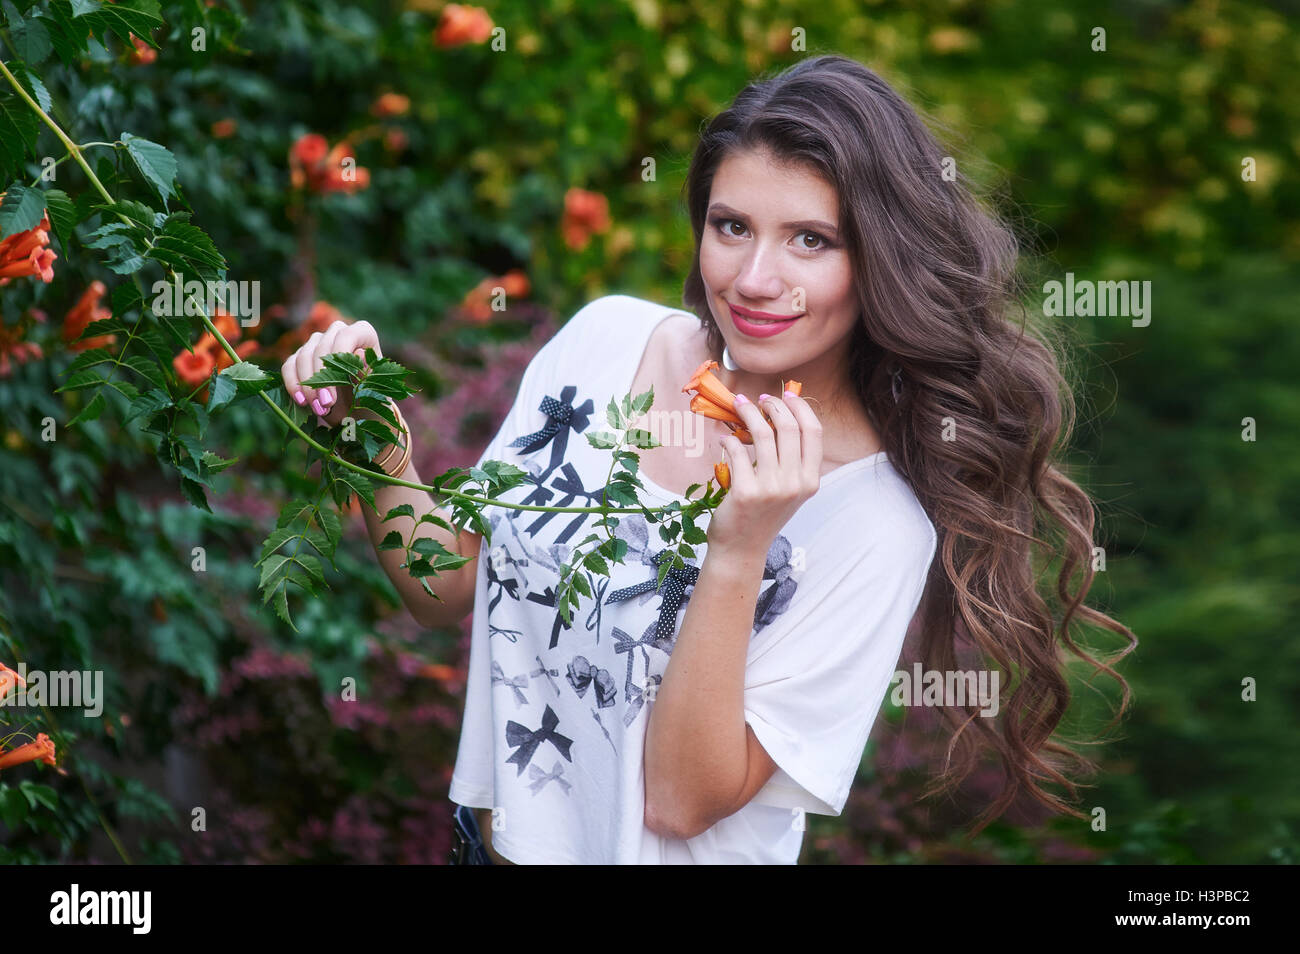 Beautiful young woman with long curly hair posing near flowers in a garden Stock Photo